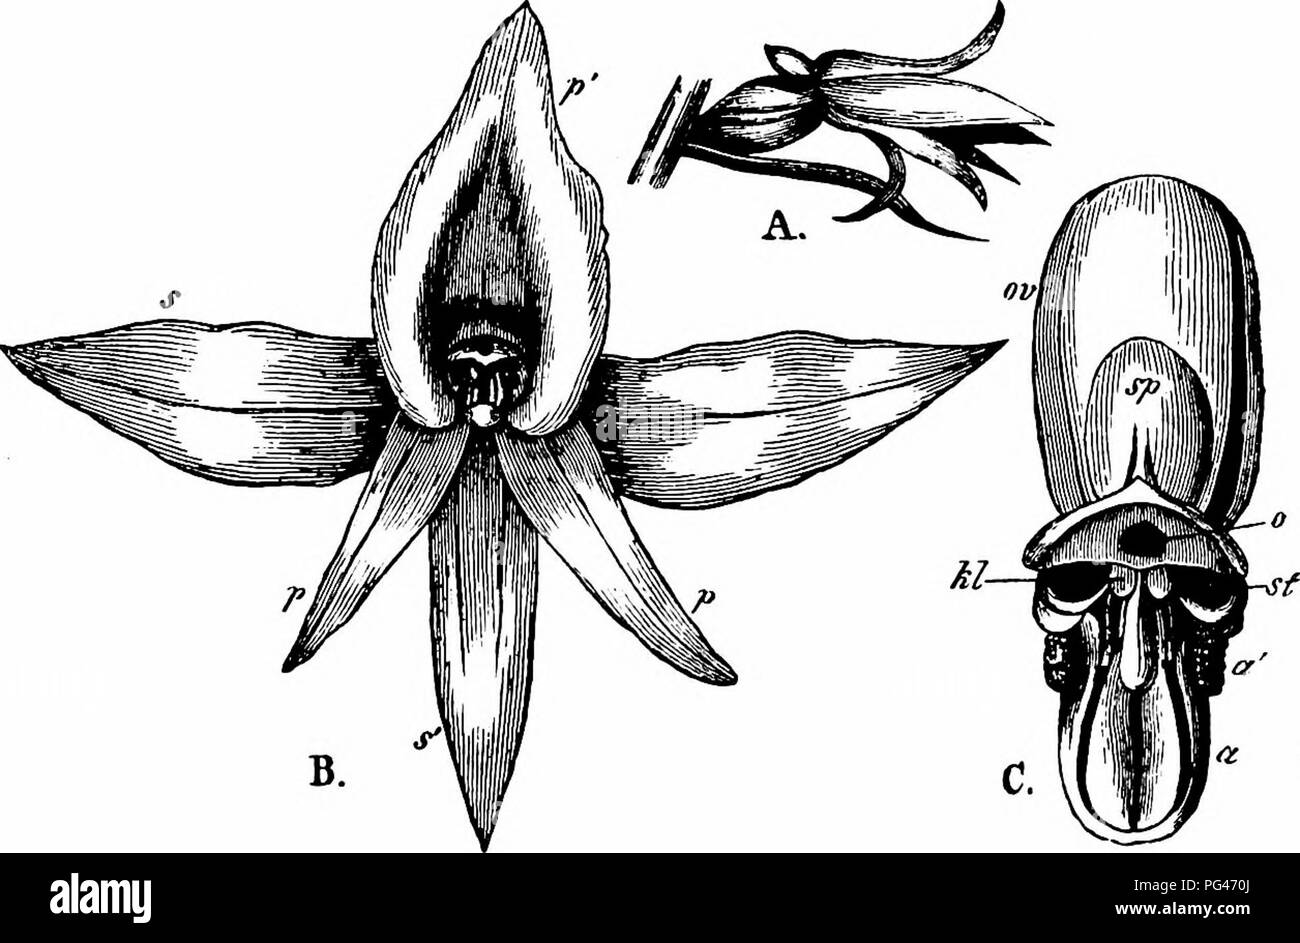 . Handbook of flower pollination : based upon Hermann Mu?ller's work 'The fertilisation of flowers by insects' . Fertilization of plants. 402 ANGIOSPERMAE—MONOCOTYLEDONES 2619. H. suaveolens Dalz. ( = Nigritella suaveolens Koch, and H. angustifolia H. B. et K. X H. conopsea Benlh.), (Herm. Muller, 'Alpenblumen/ pp. 69-70; Kemer, op. cit., pp. 563, 586.)—This is a hybrid between two lepidopterid species. The colour of the flowers is between carmine and pink. The possibility of. Fig. 370. Hahenaria an^stifolia, H. B. et K. (after Herm. Miiller). A. Flower, seen from the side (x 2i). B. Do., seen Stock Photo